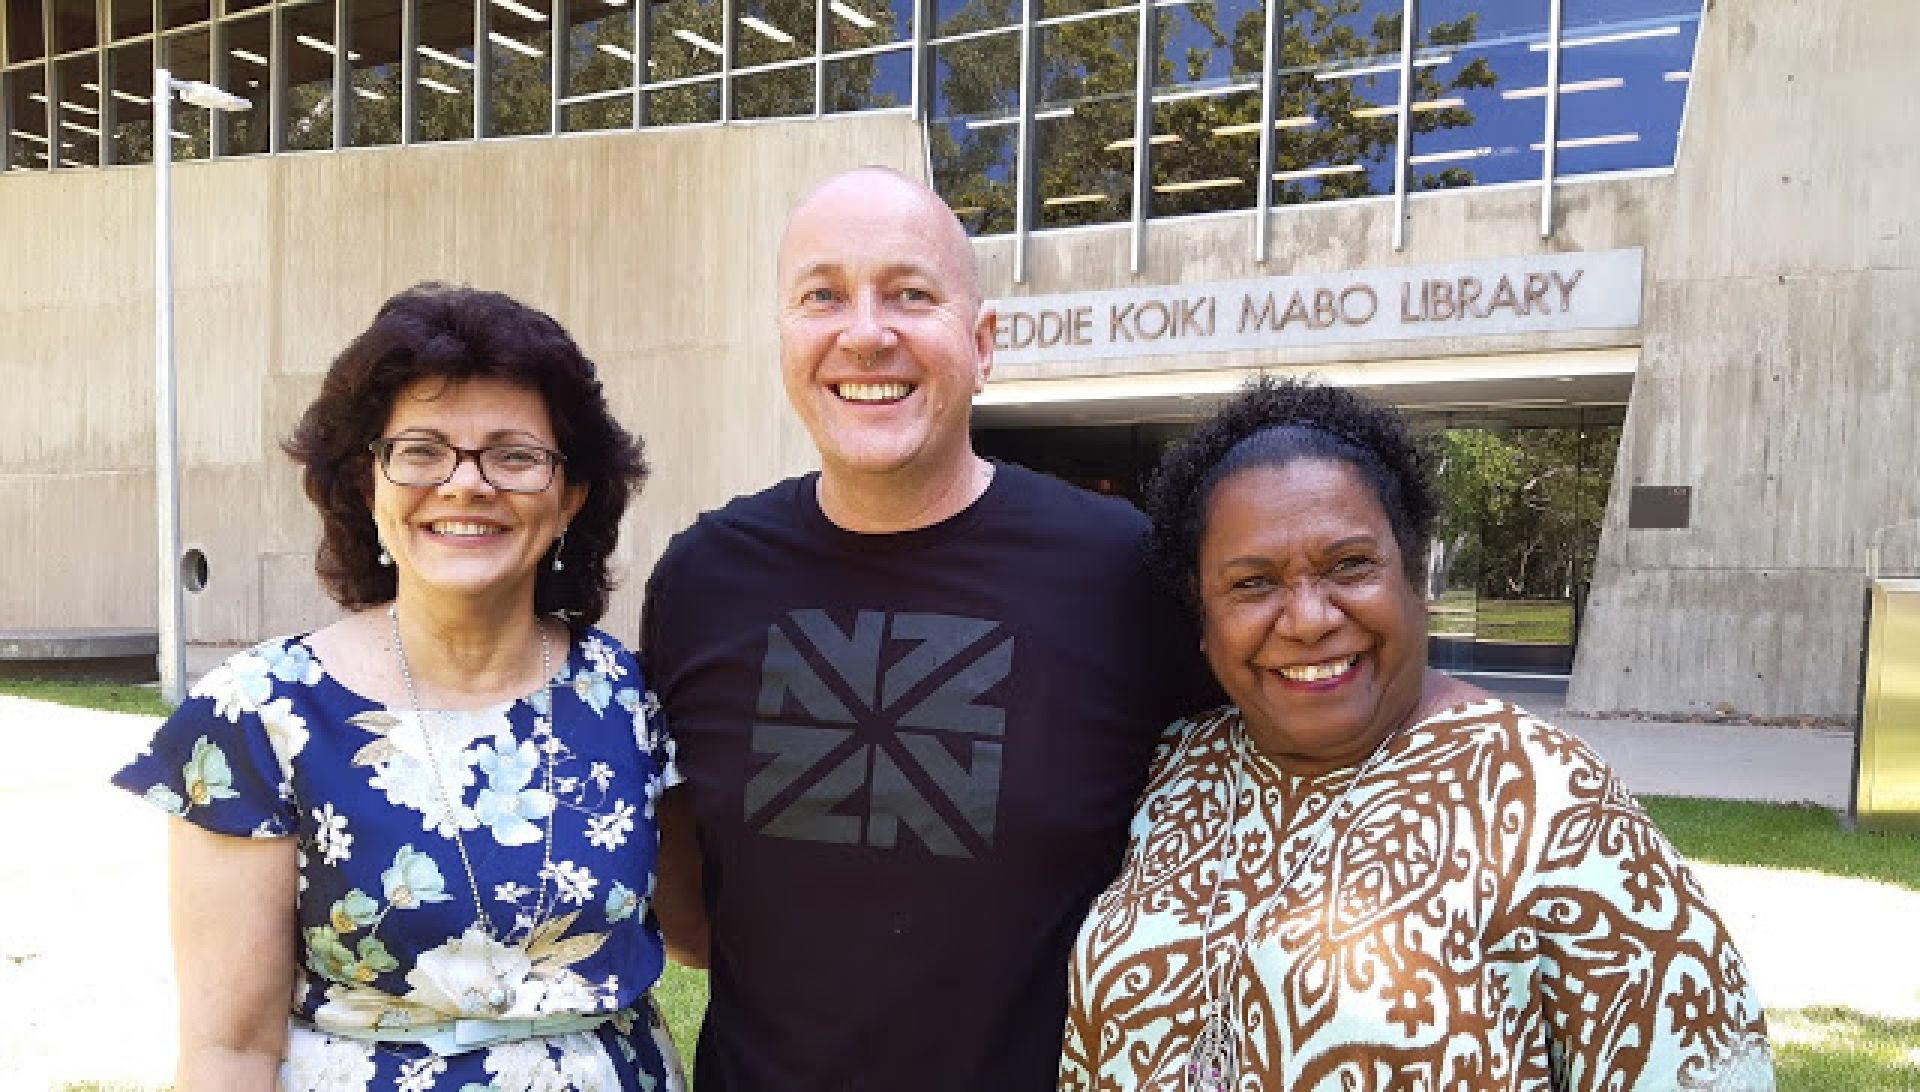 Helen Hooper, Rob Douma, and Gail Mabo smile while standing in front of the Mabo Library